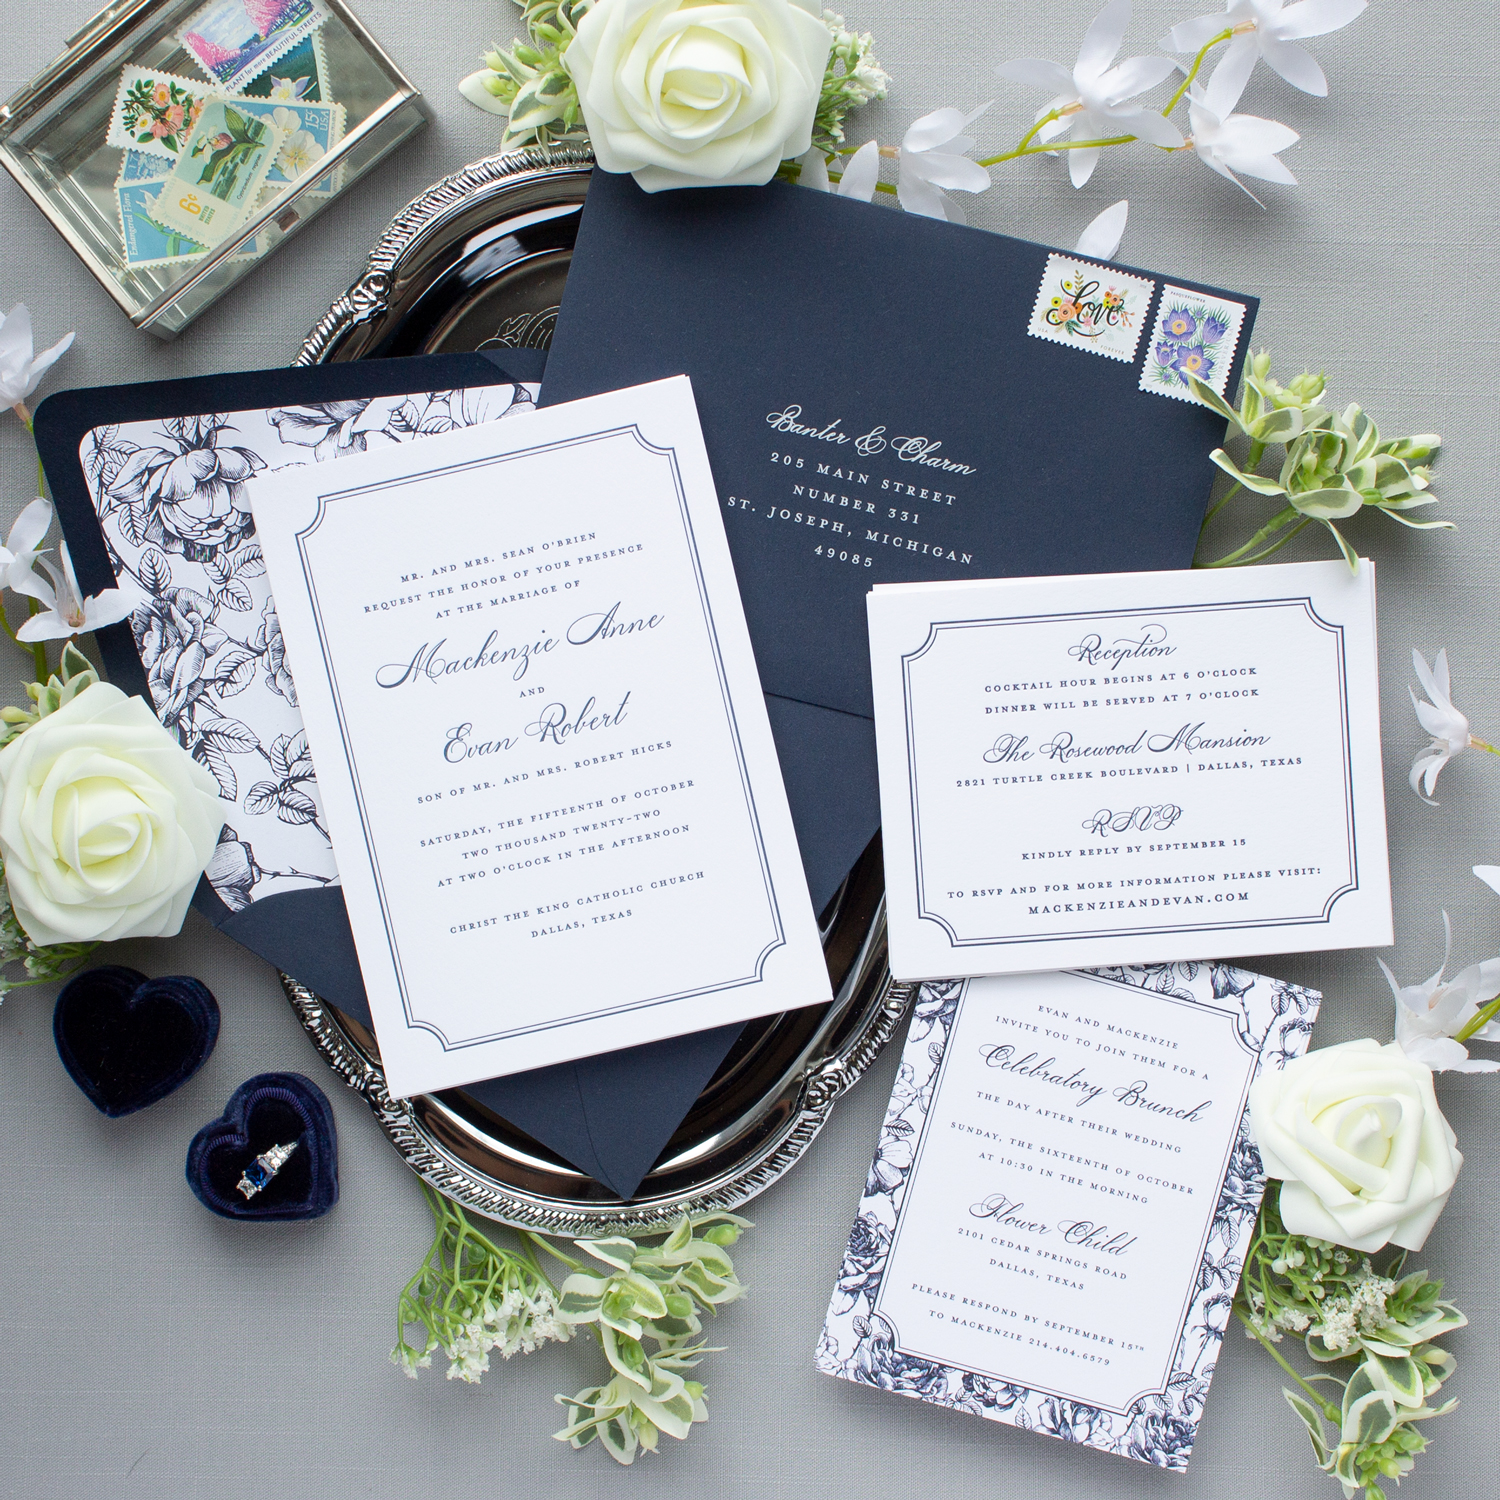 The Rosewood Mansion wedding invitations